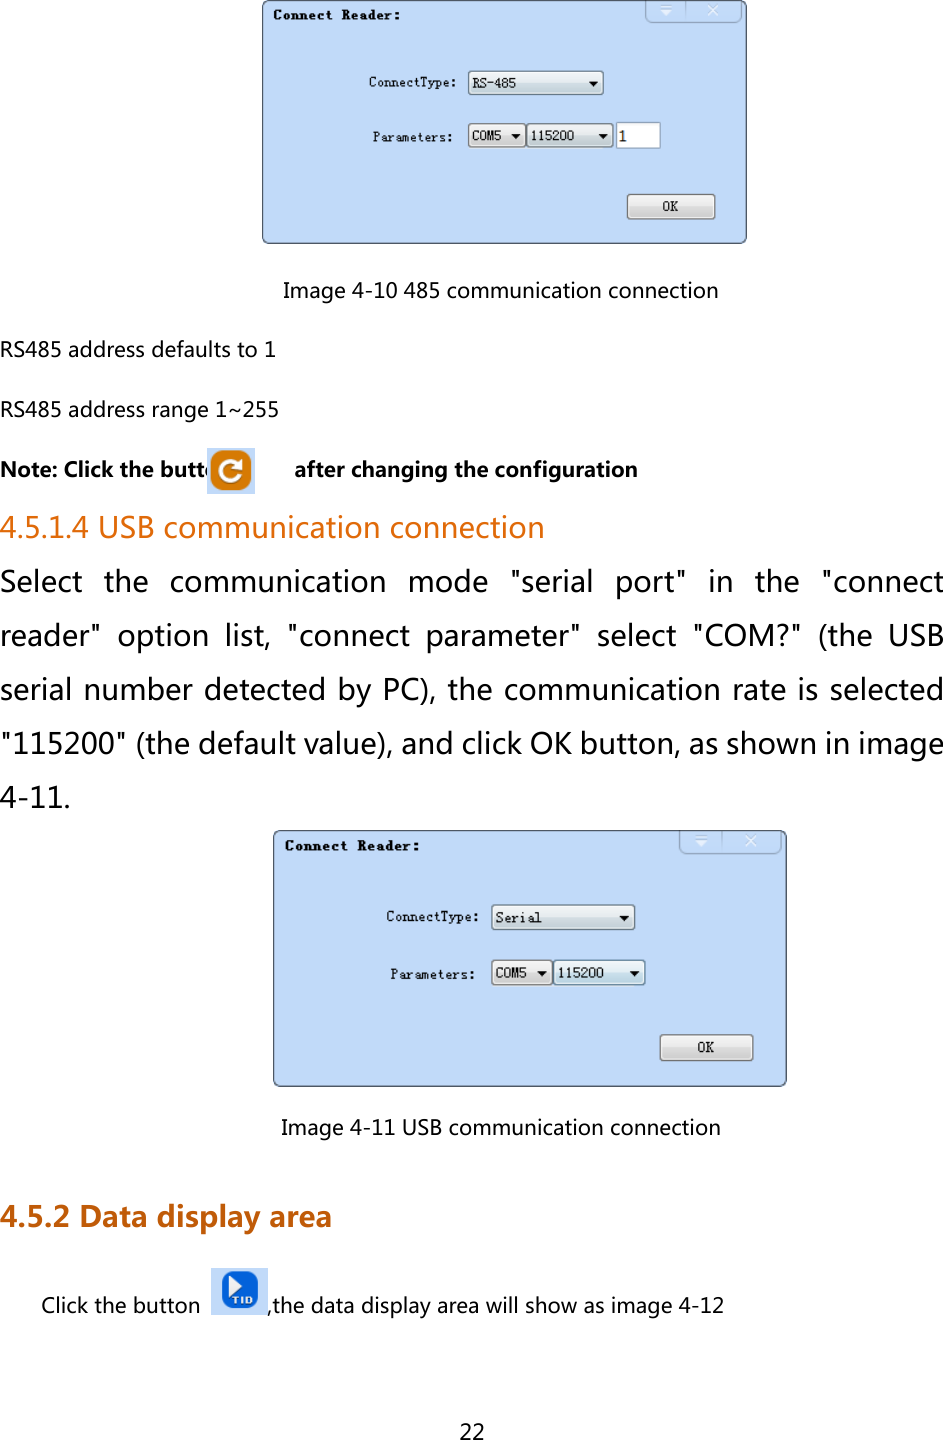  22                            Image 4-10 485 communication connection RS485 address defaults to 1 RS485 address range 1~255 Note: Click the button            after changing the configuration 4.5.1.4 USB communication connection Select the communication mode &quot;serial port&quot; in the &quot;connect reader&quot;  option  list,  &quot;connect  parameter&quot;  select  &quot;COM?&quot;  (the  USB serial number detected by PC), the communication rate is selected &quot;115200&quot; (the default value), and click OK button, as shown in image 4-11.                            Image 4-11 USB communication connection 4.5.2 Data display area Click the button  ,the data display area will show as image 4-12 